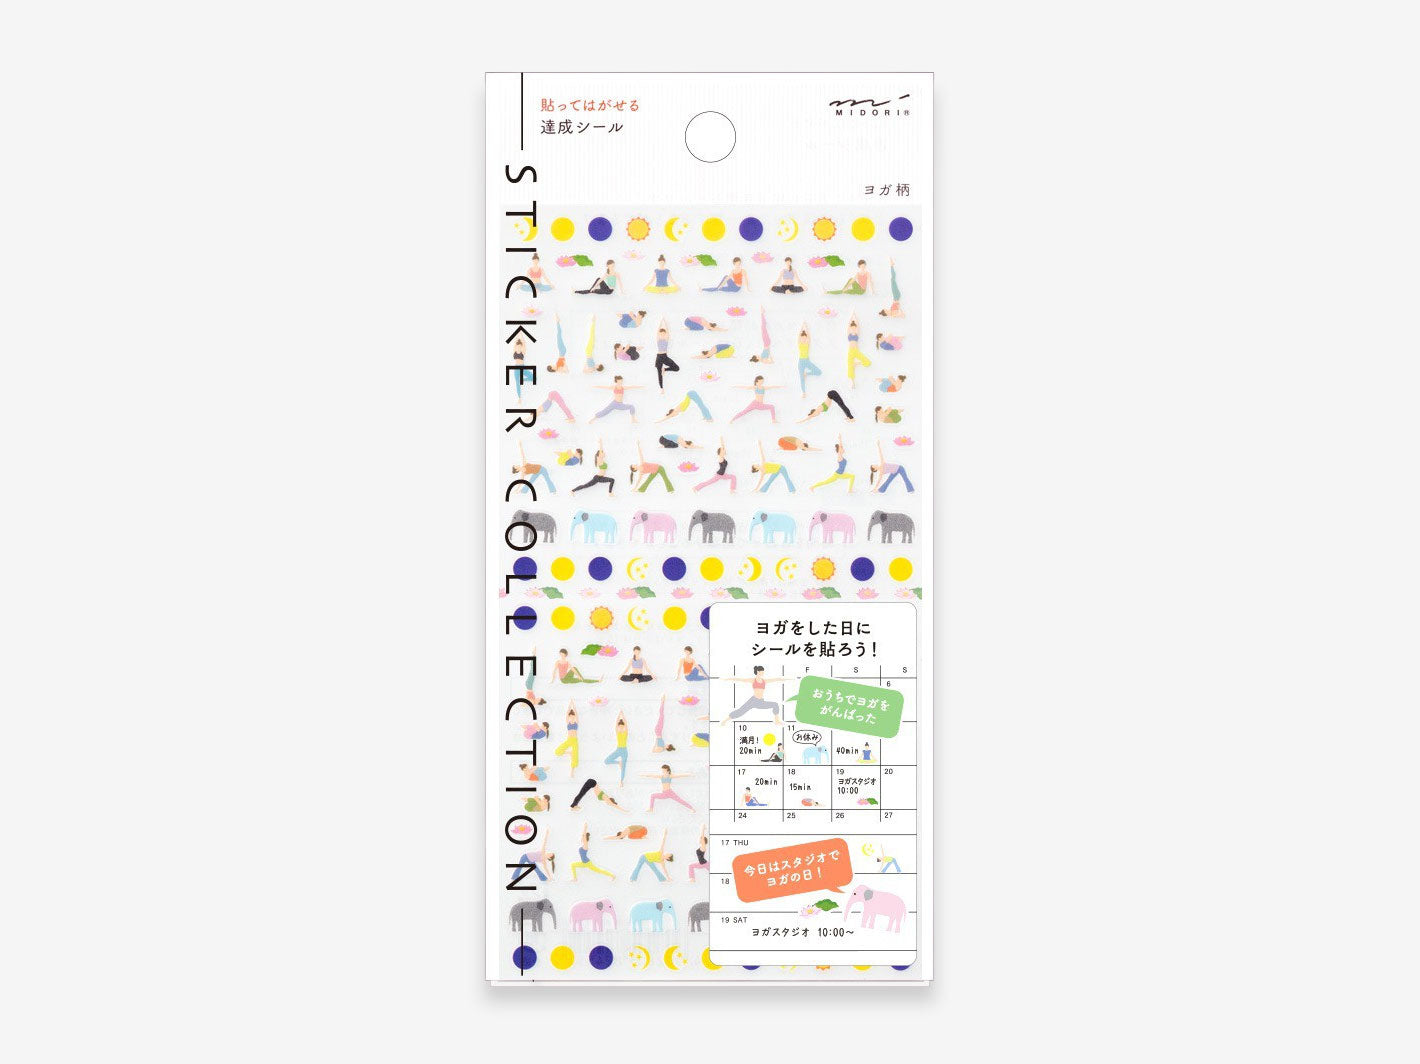 Midori Stickers for Diary, Weather